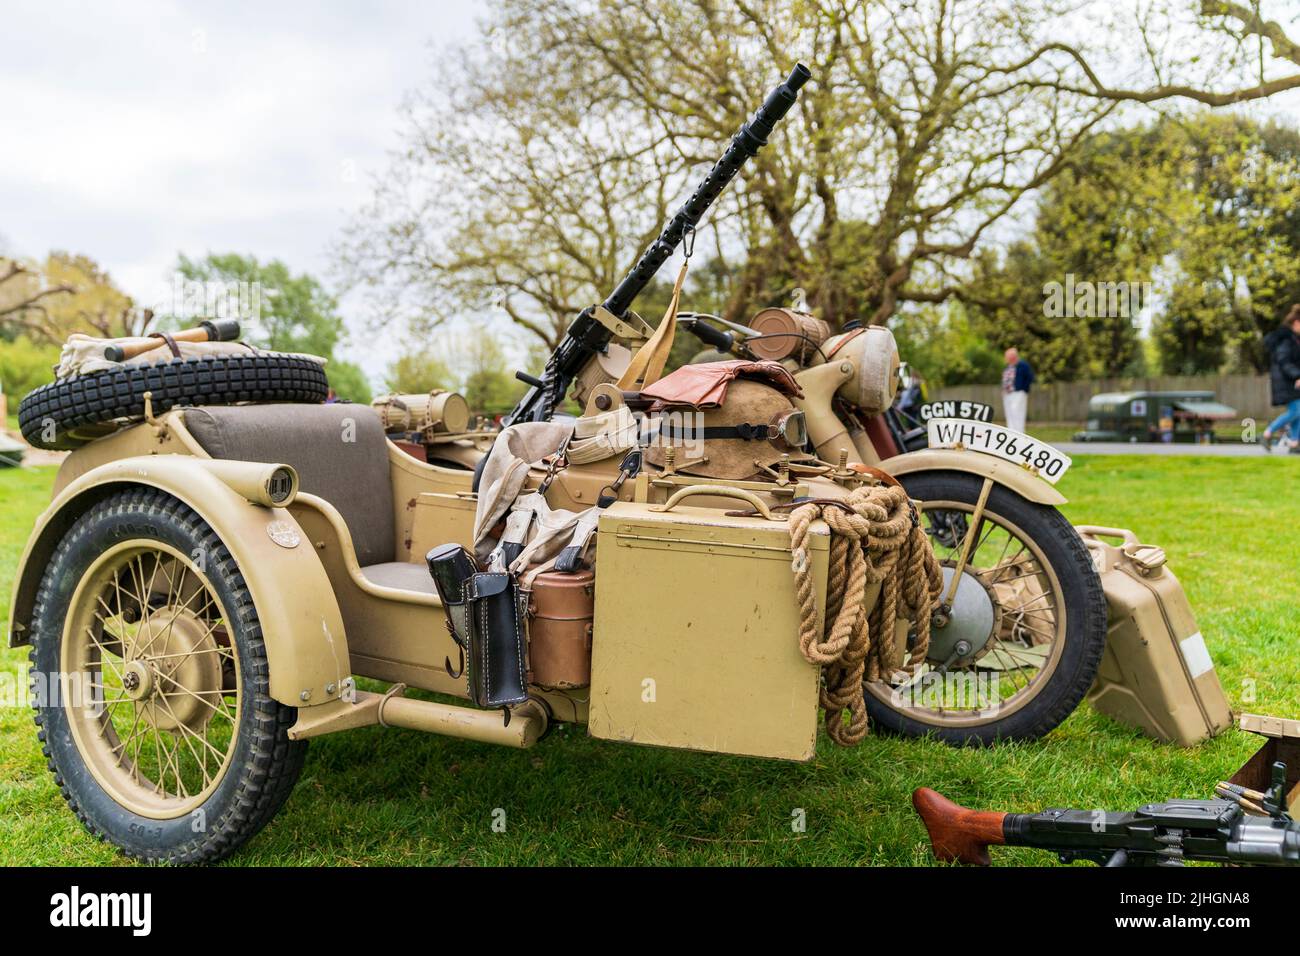 World war two vintage German motorcycle and side car with mounted MG34 machine gun. Painted yellow-green for afrika korps desert camouflage. Stock Photo